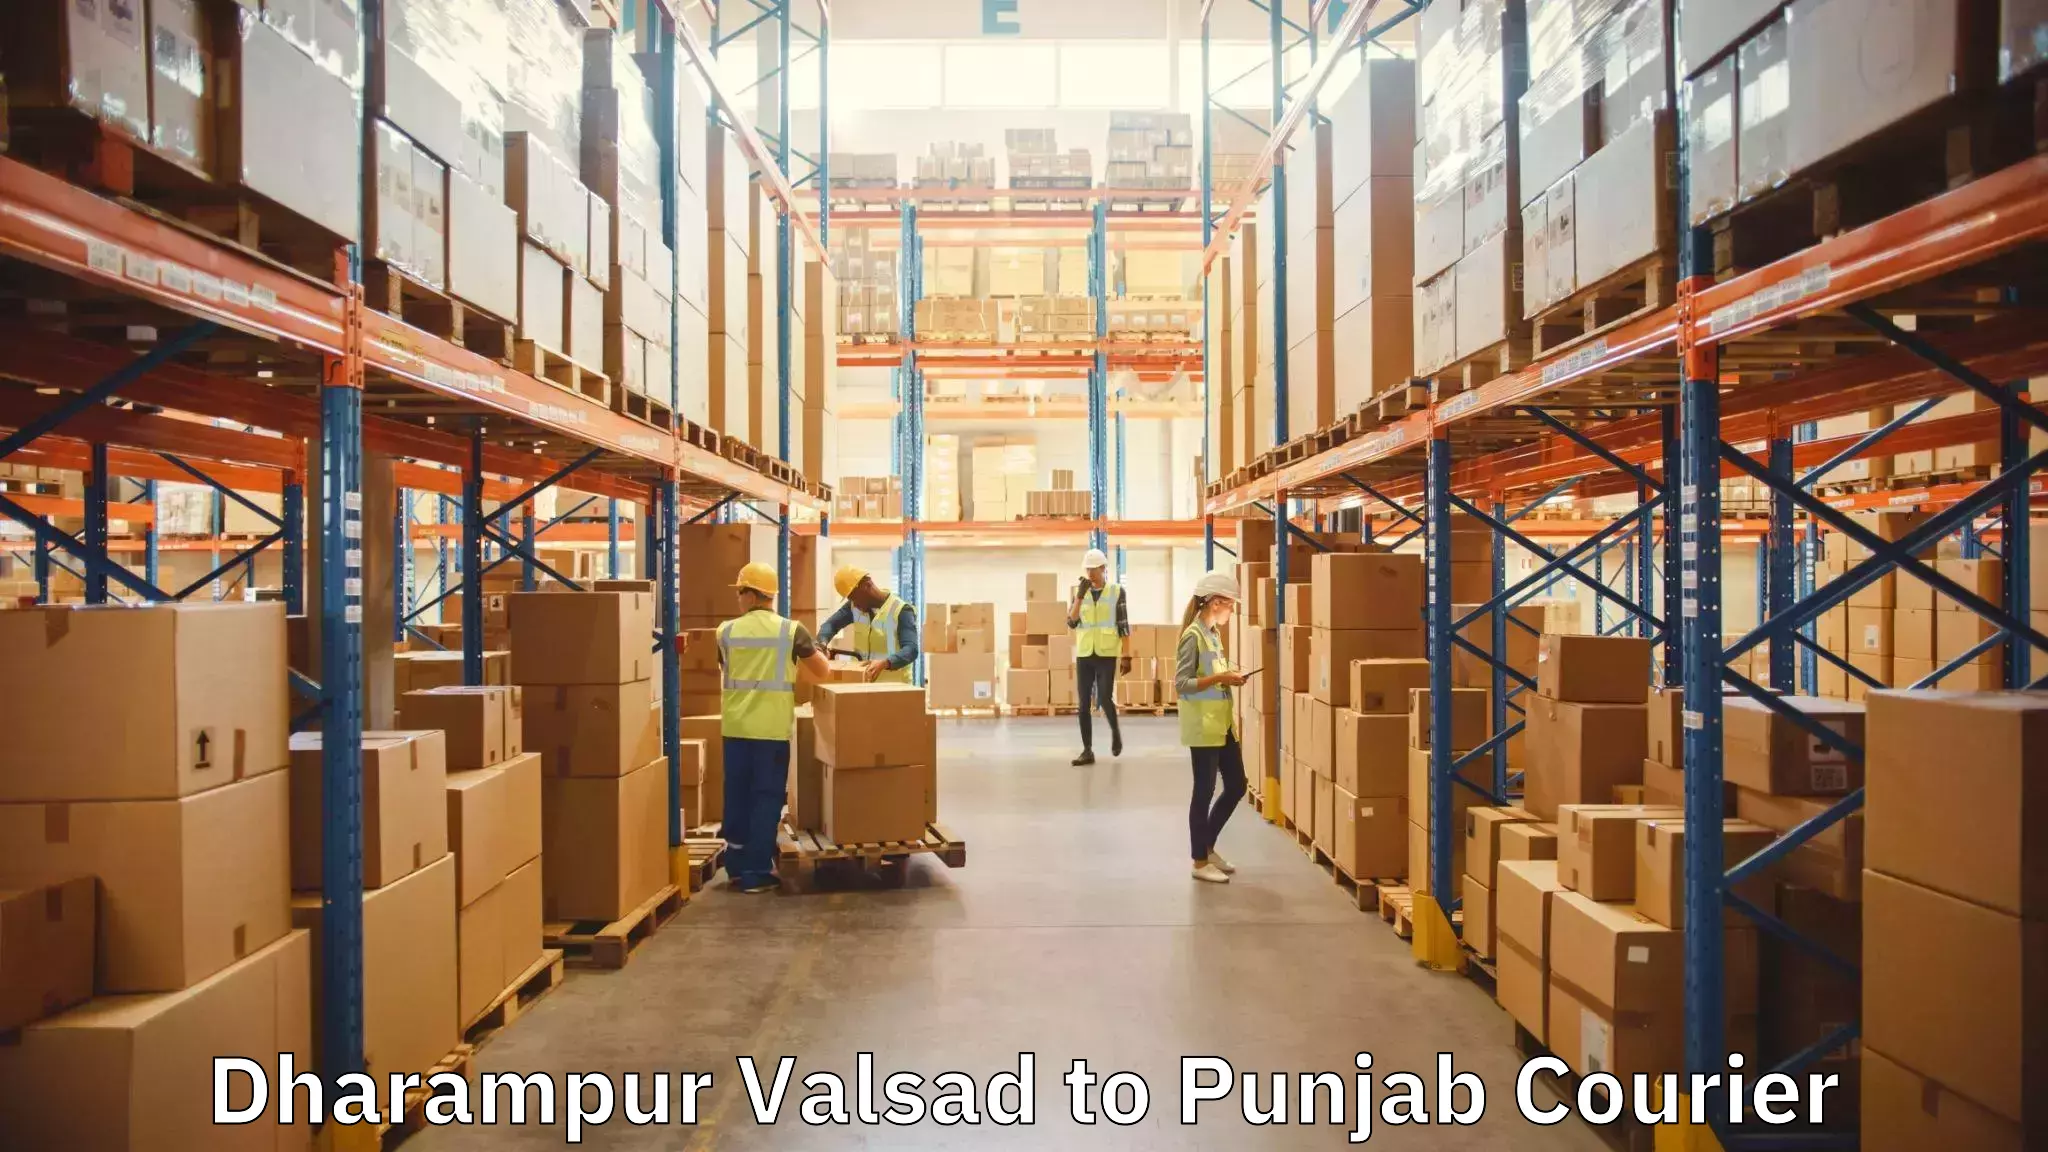 Home moving specialists Dharampur Valsad to Mandi Gobindgarh